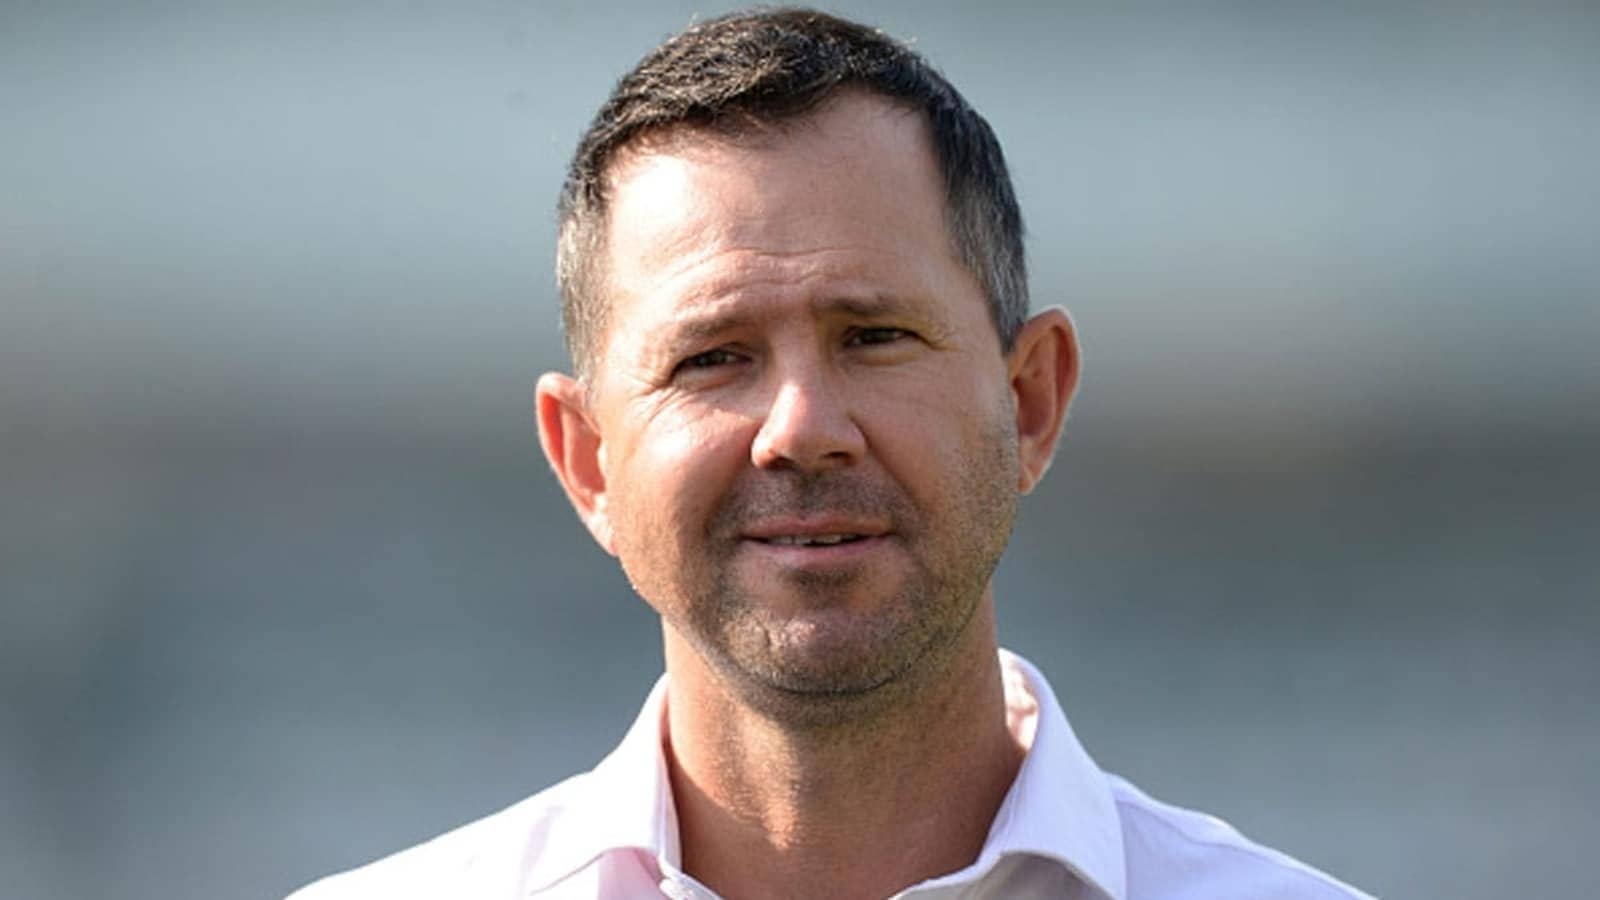 Ricky Ponting Age, Height, Wife, Family - Biographyprofiles